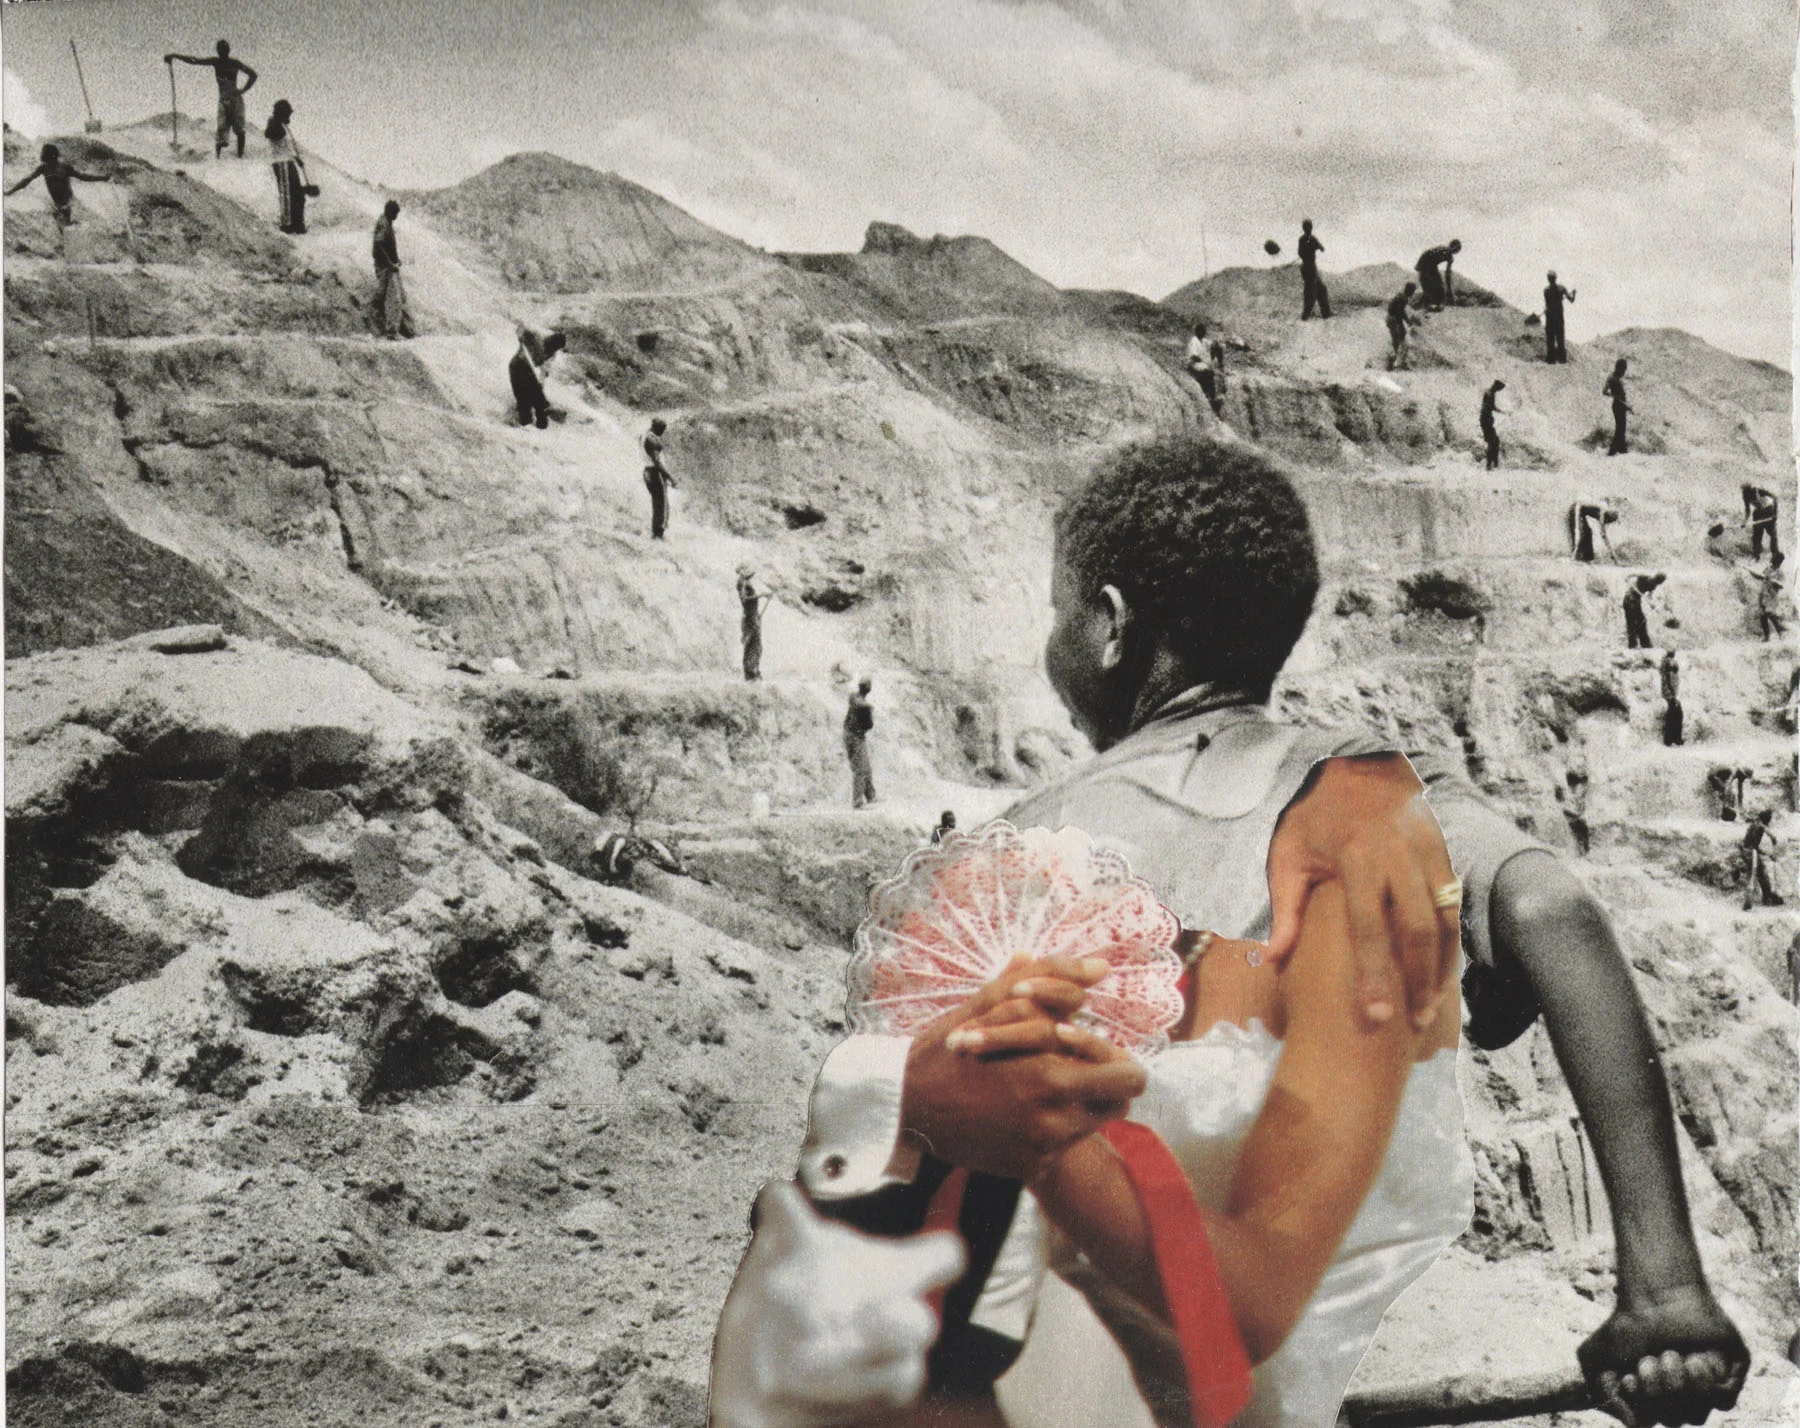 A photo collage: the main image depicts a group of men working on a desolate mountain side, with a cutout of people dancing foregrounding the collage.